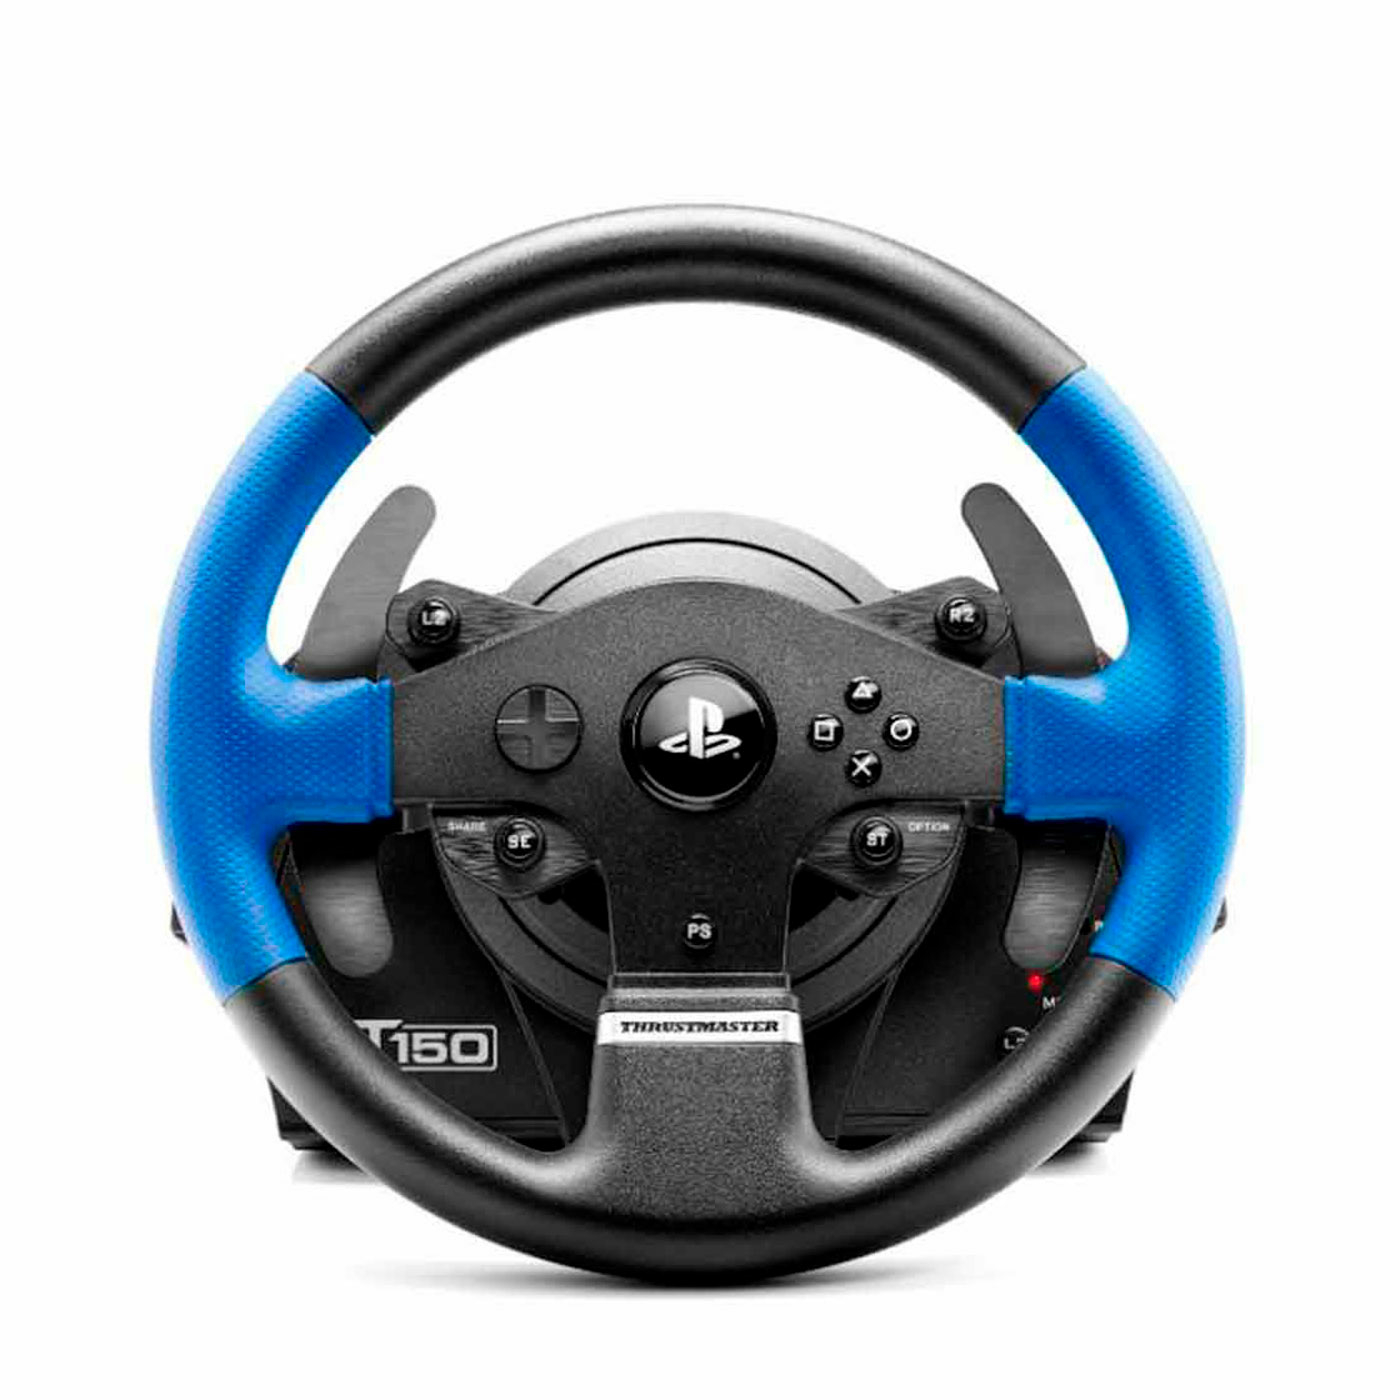 Timón + Pedales THRUSTMASTER PS3|PS4 T150 RS Pro Azul|Negro